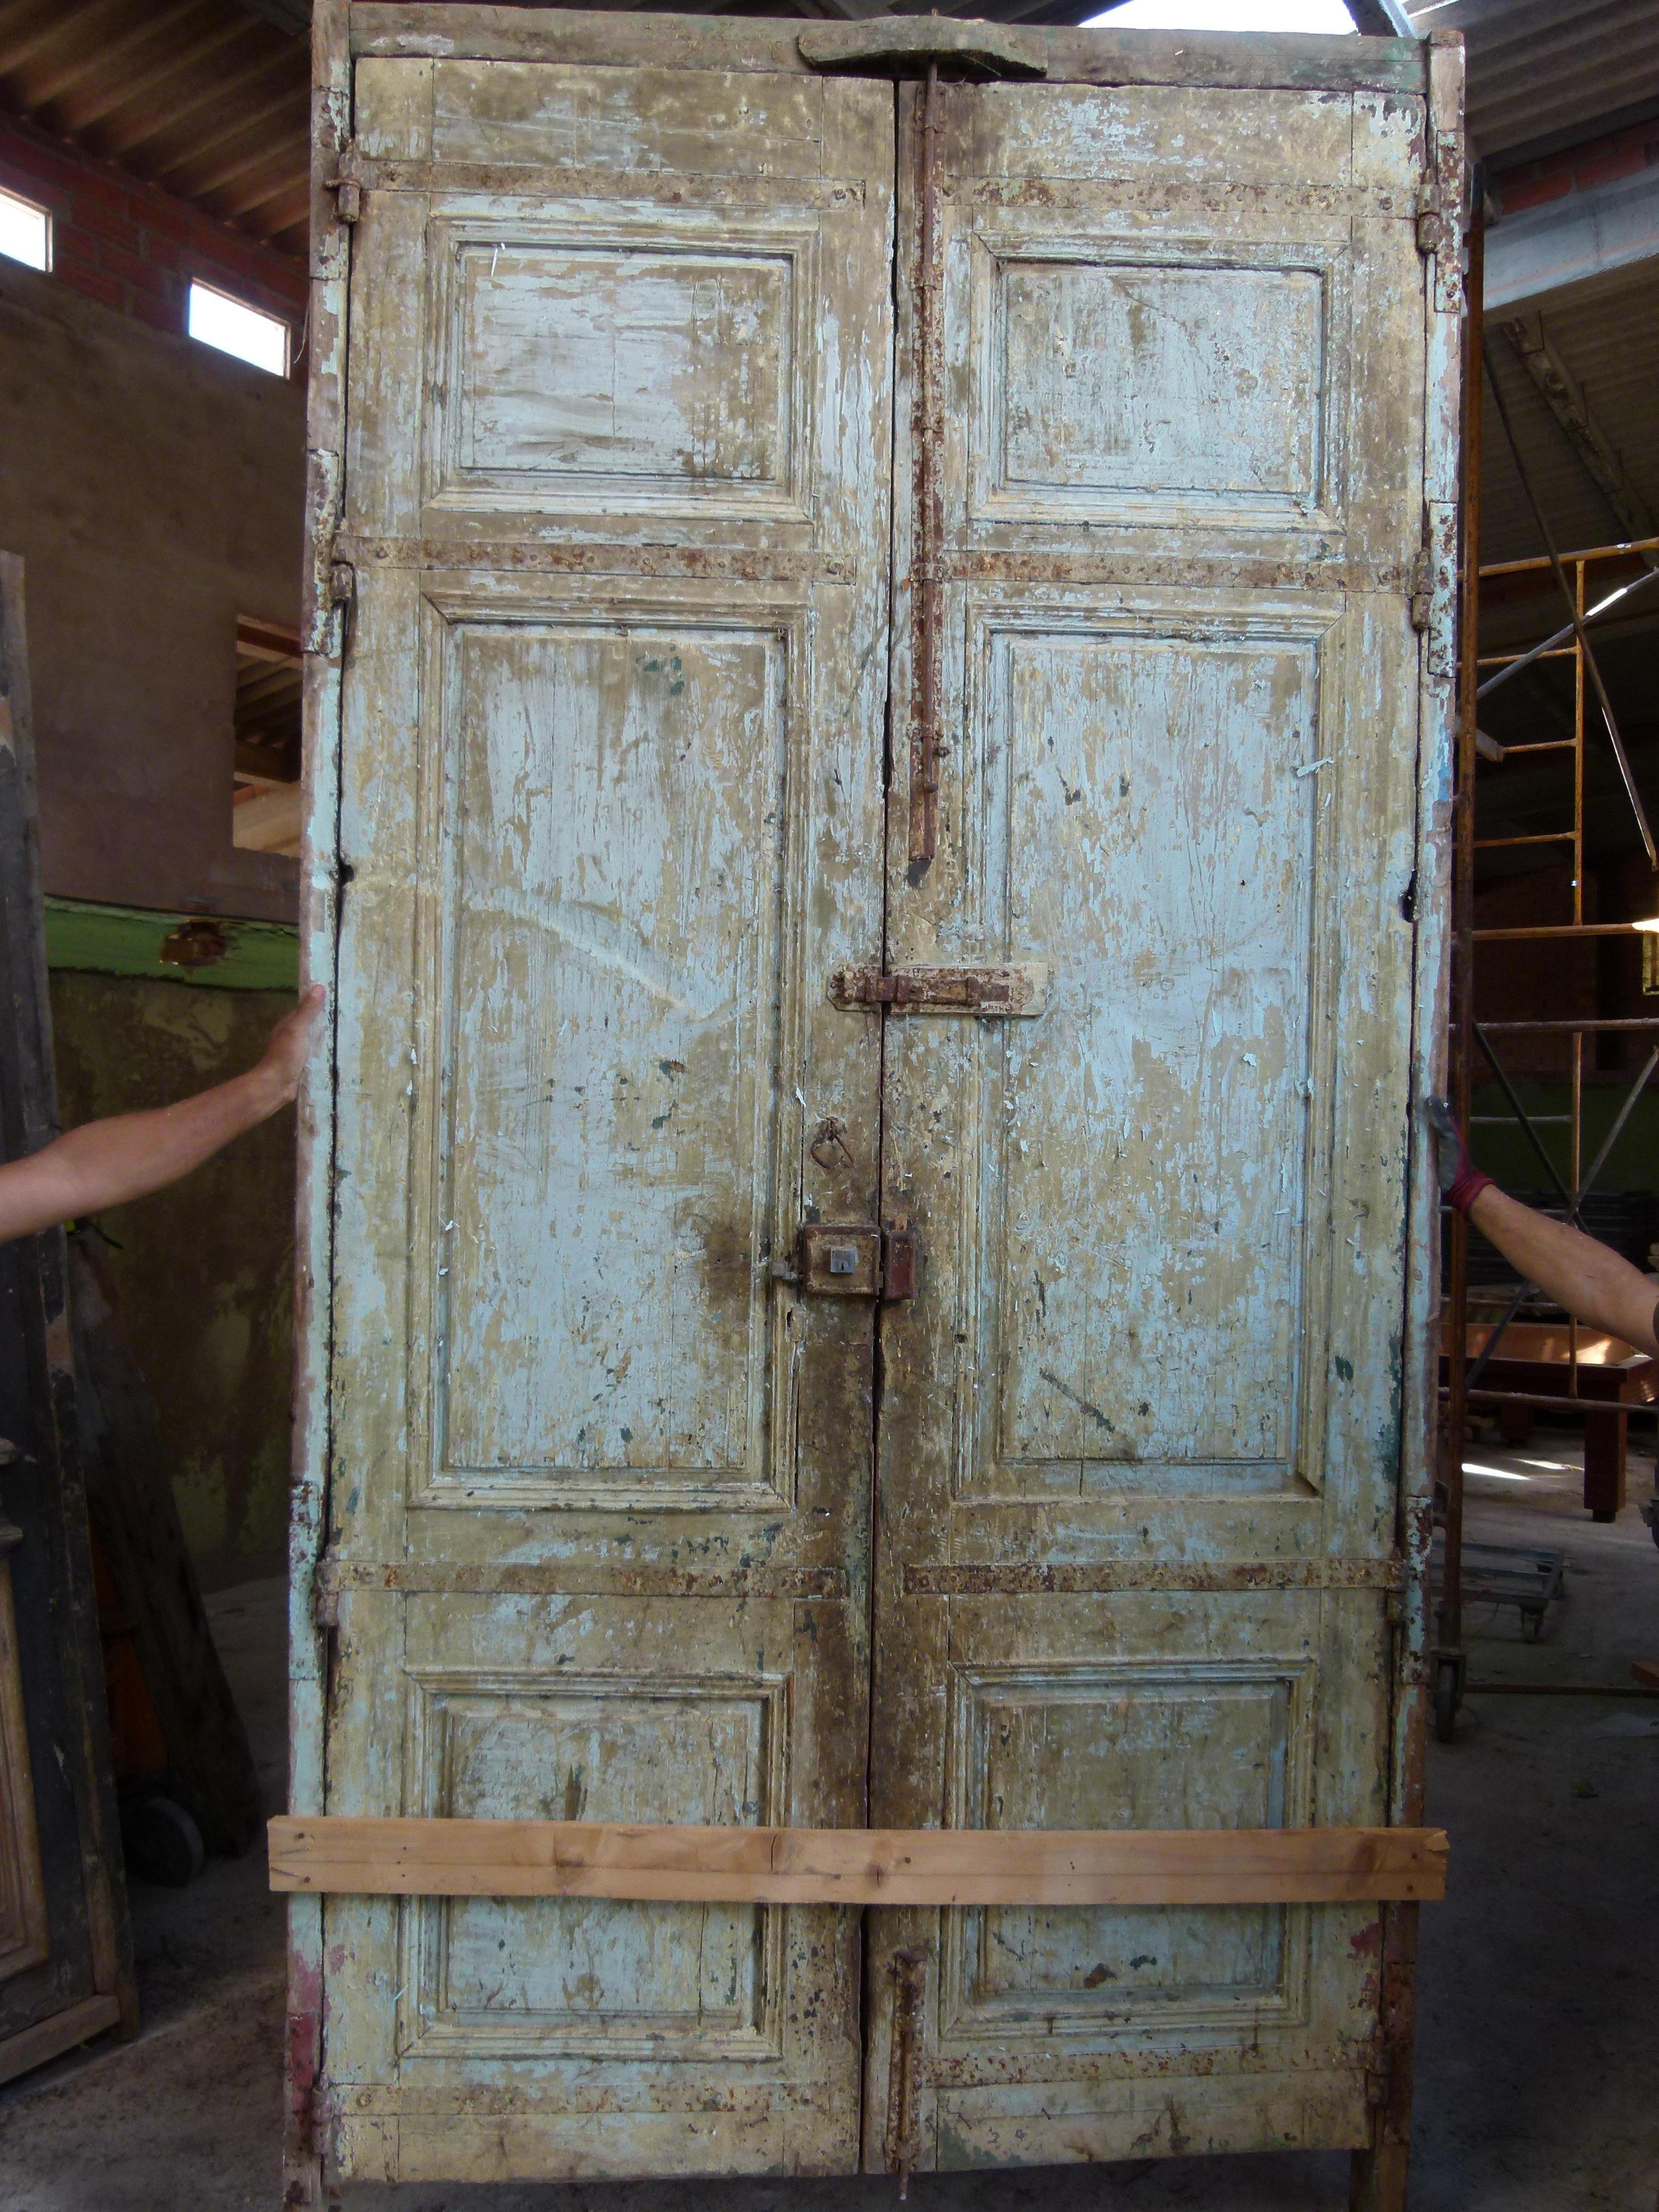 19th century double wooden front door with patina in Art Nouveau style from Catalonian, Spain.
Carved wood typical from this period.
The door is framed and working but needs some restoration as some parts are damaged.
The original patina of the